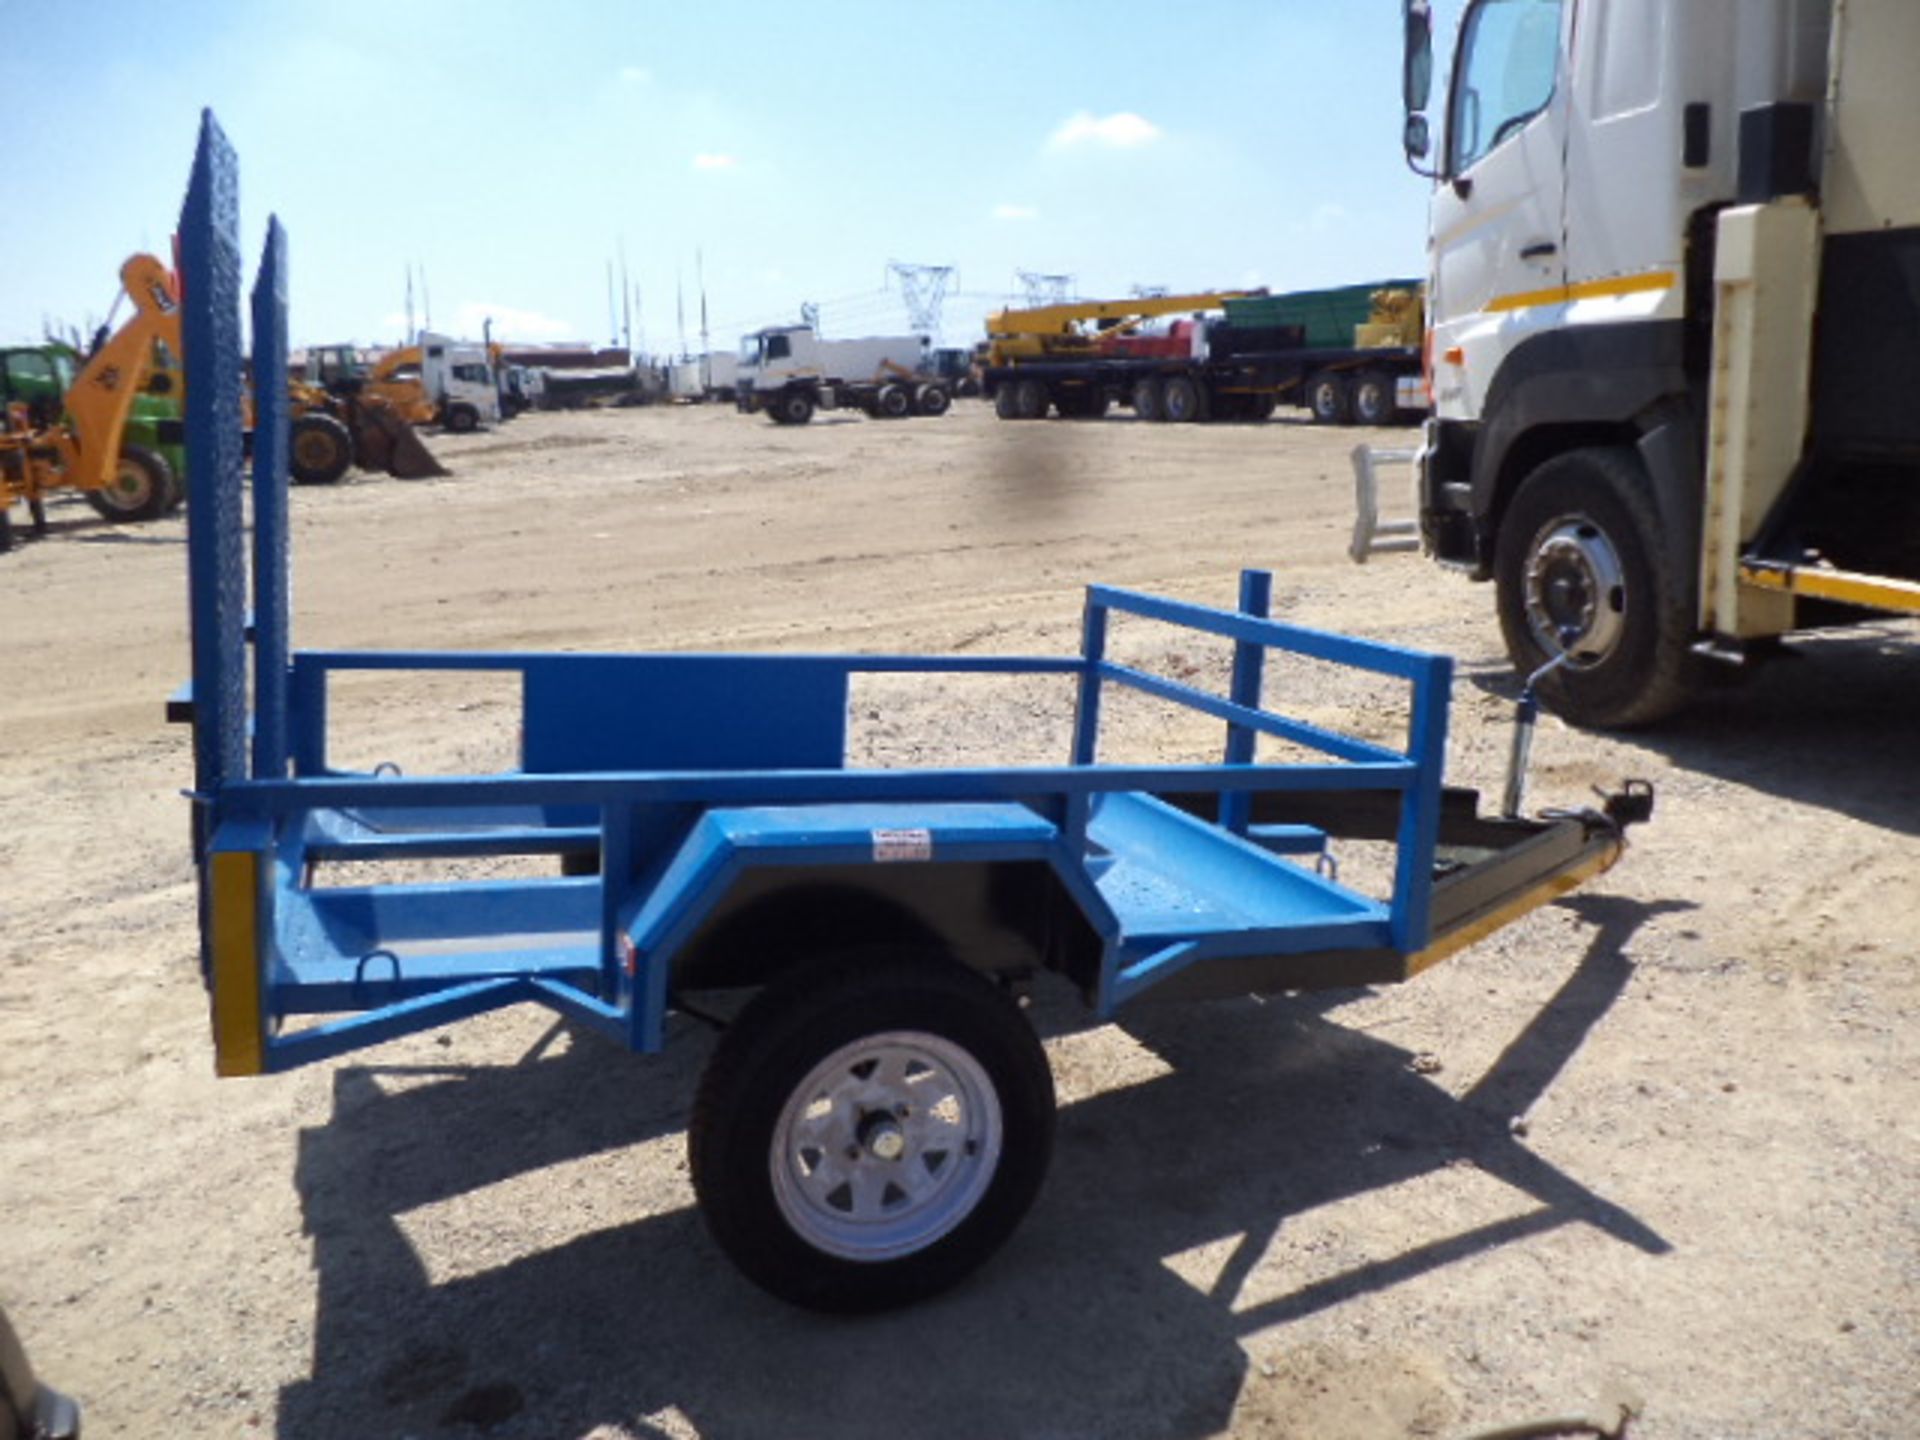 NEW Single Axle Blue Trailer With Ramps (Vin No: AA9B175UBEBTT1323 )(un-registered) - Image 4 of 4